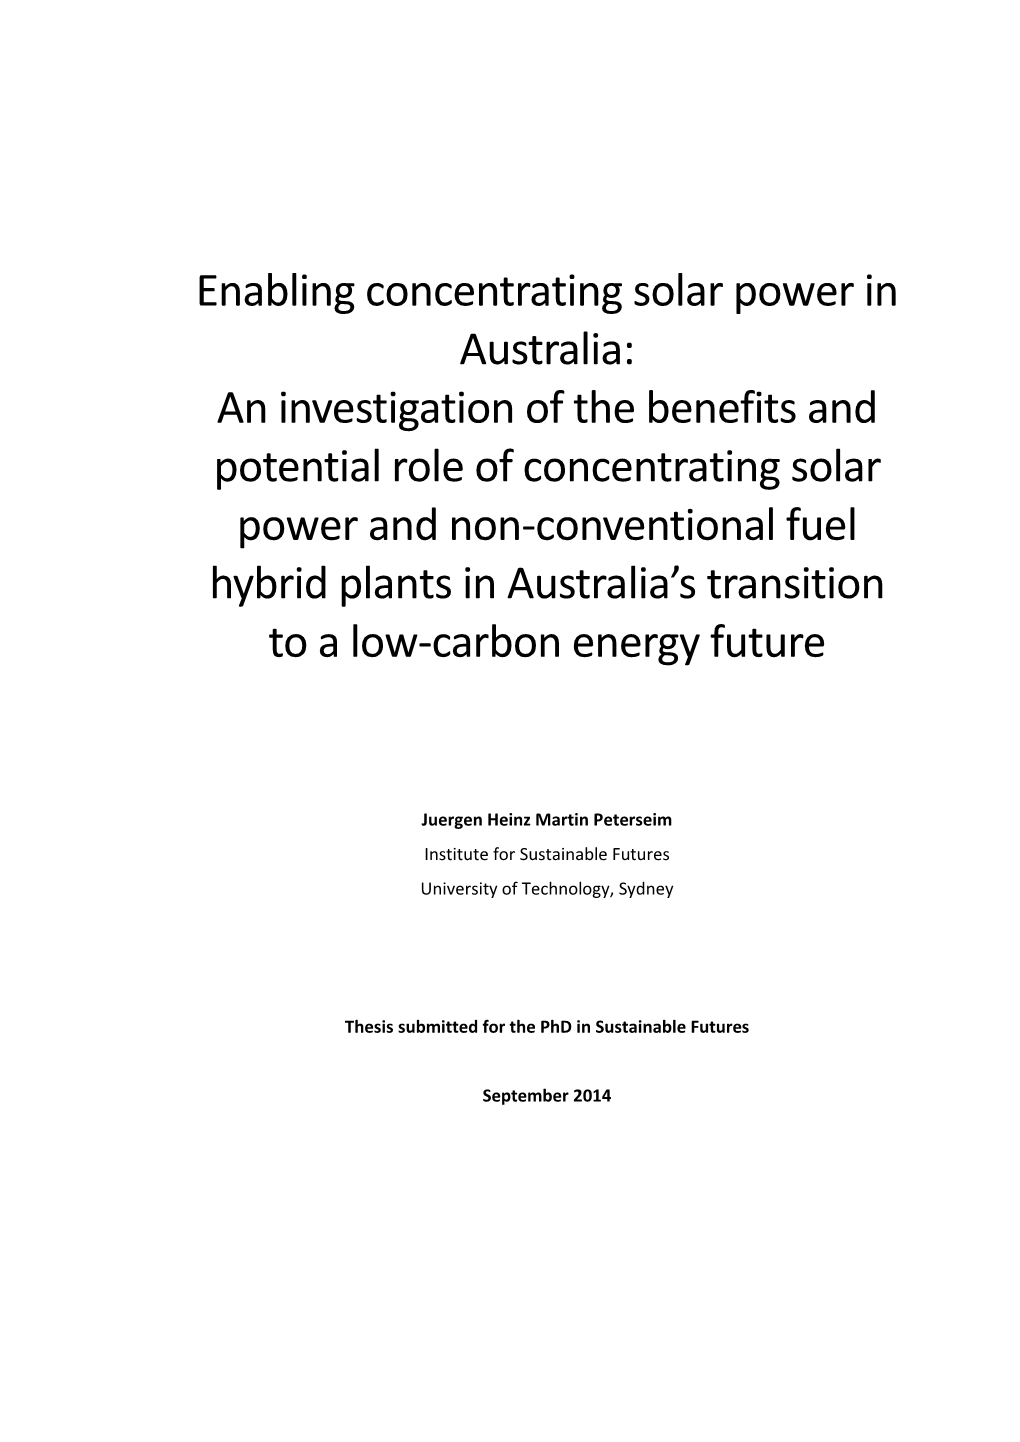 An Investigation of the Benefits and Potential Role of Concentrating Solar